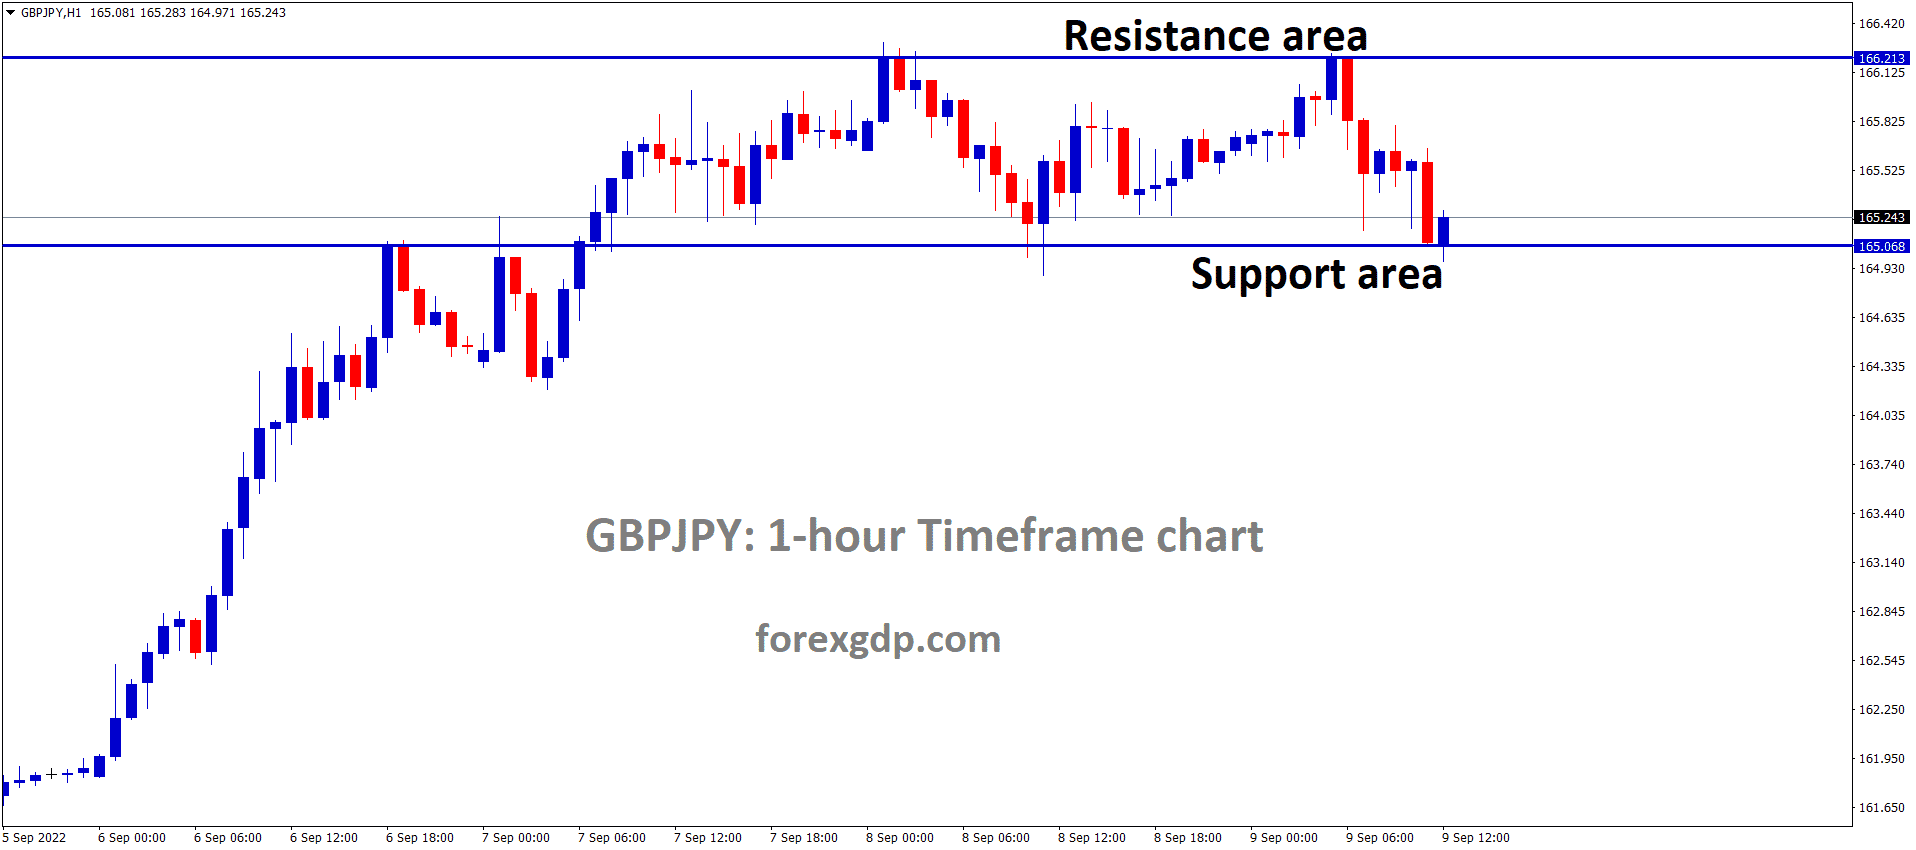 GBPJPY is moving in the Box pattern and the market has rebounded from the horizontal support area of the pattern